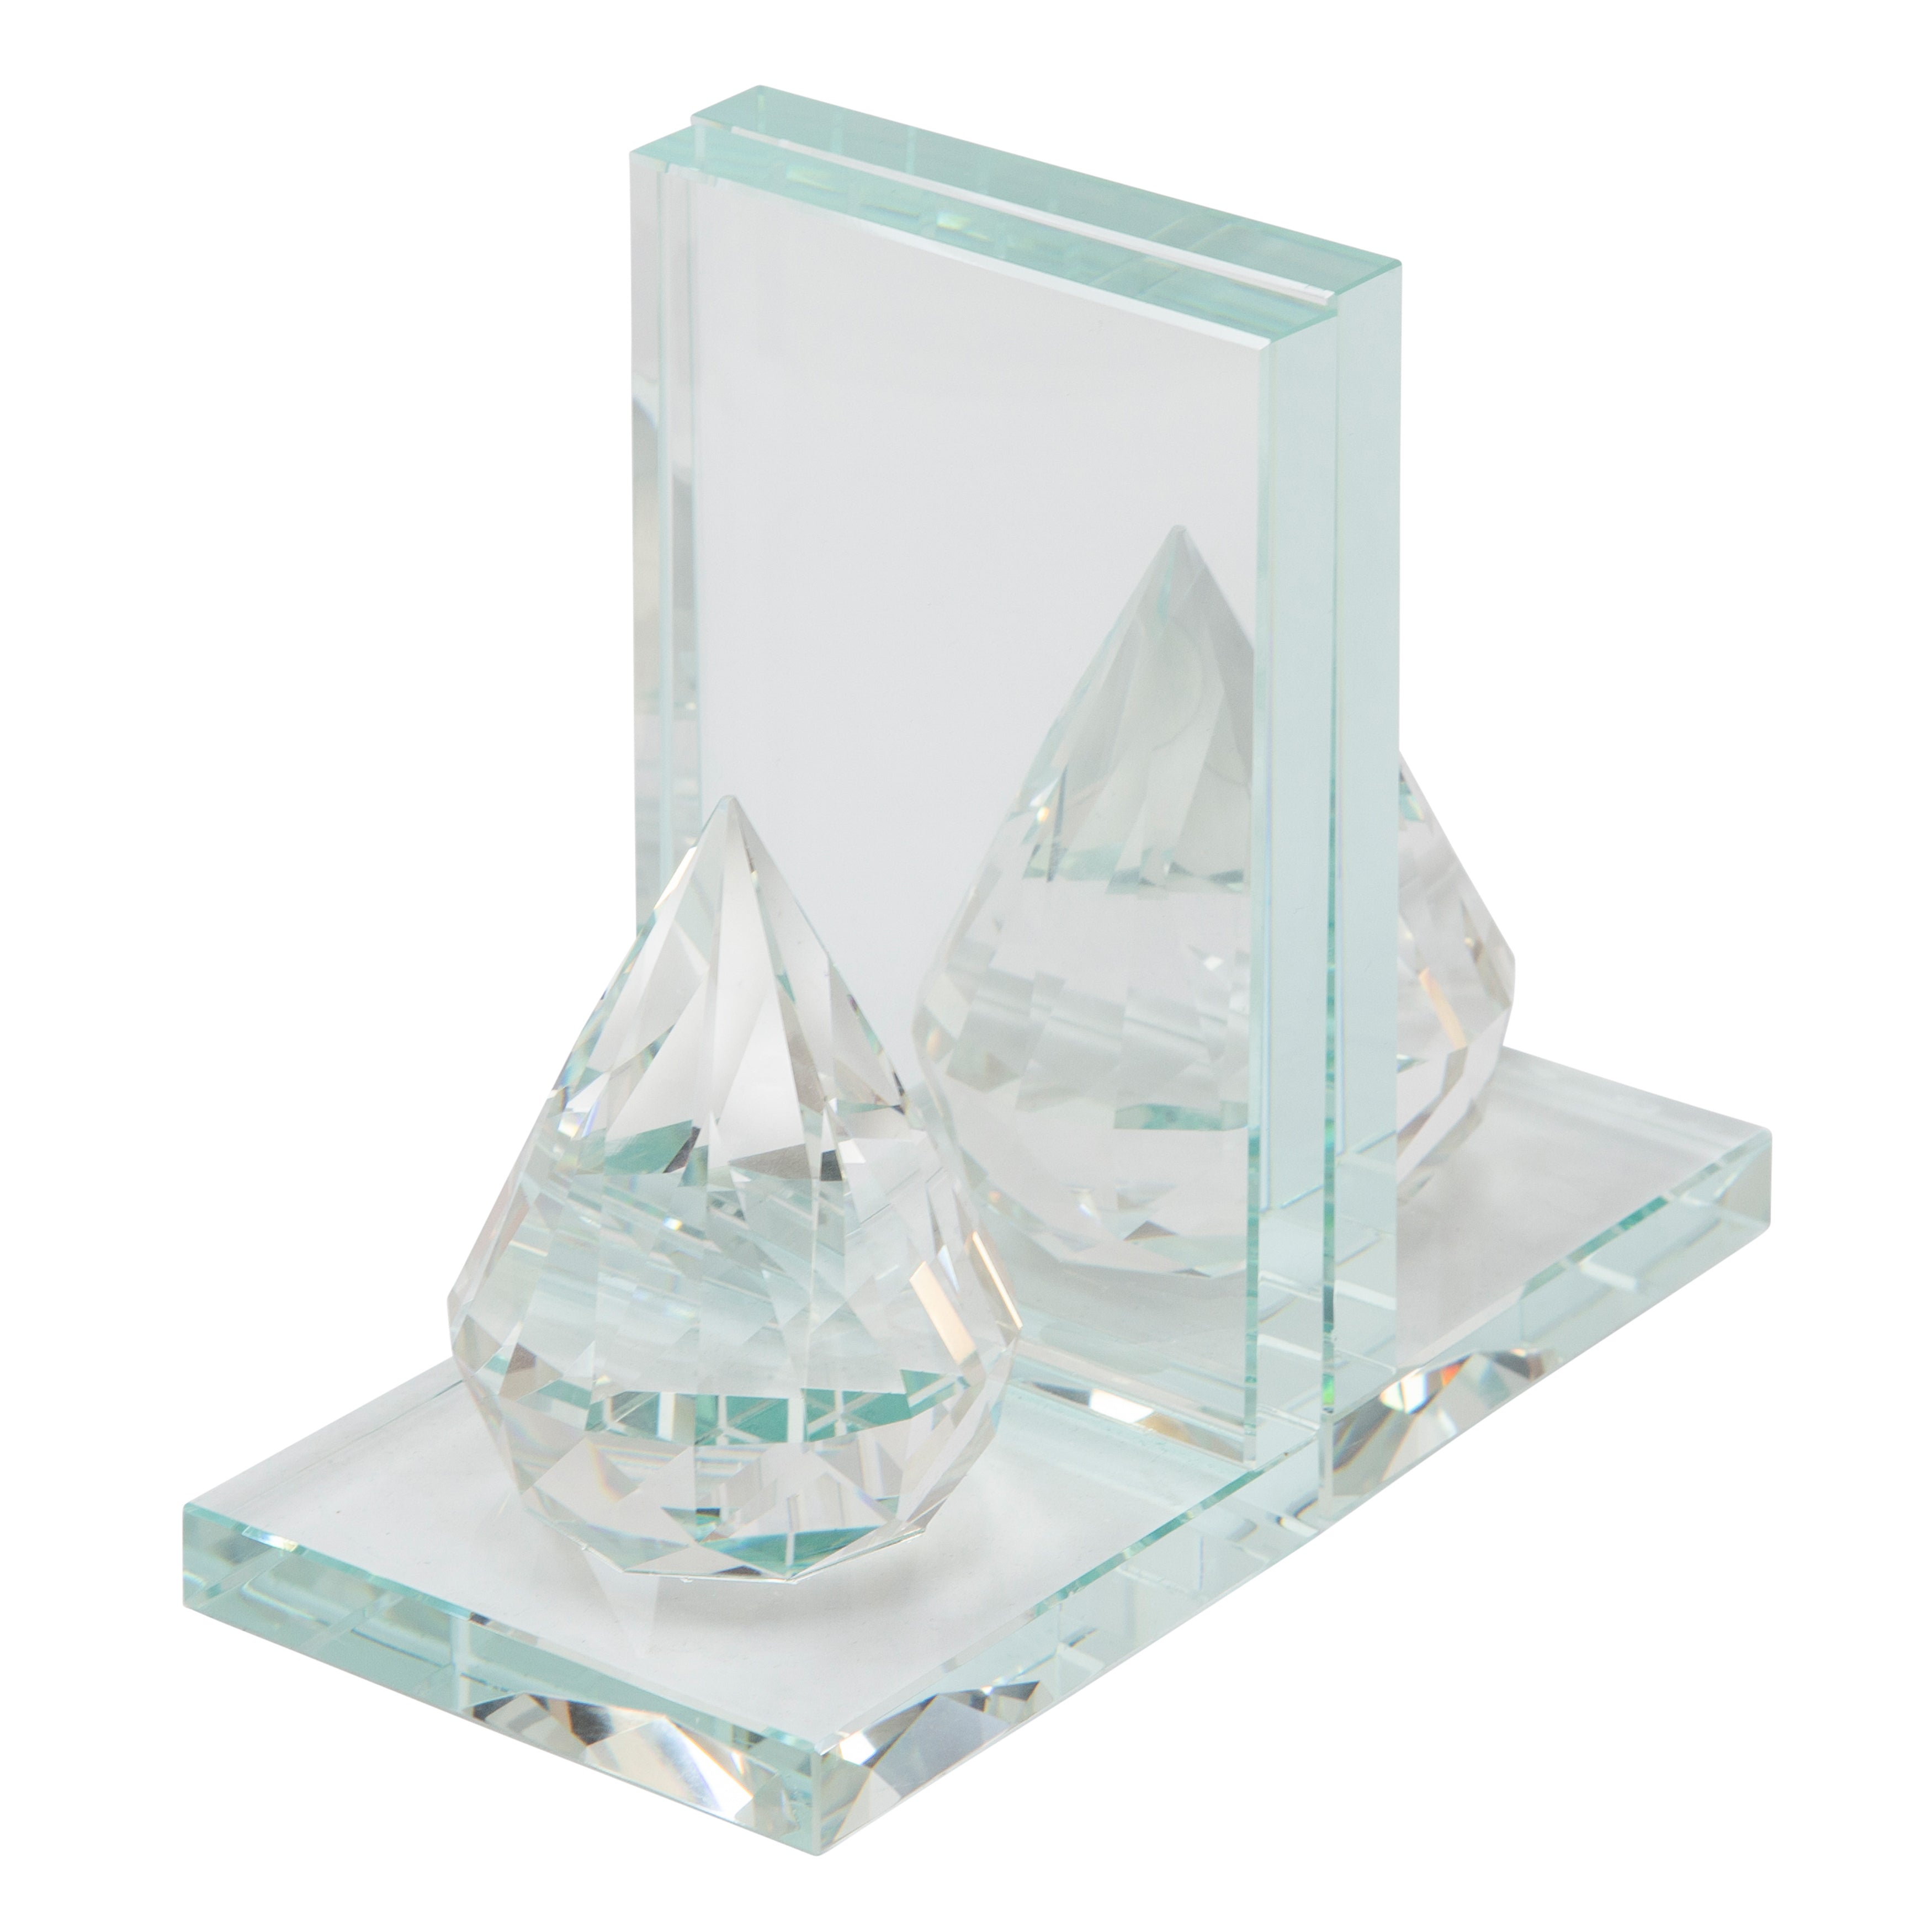 Set of 2 Crystal Teardrop Bookends, Bookends